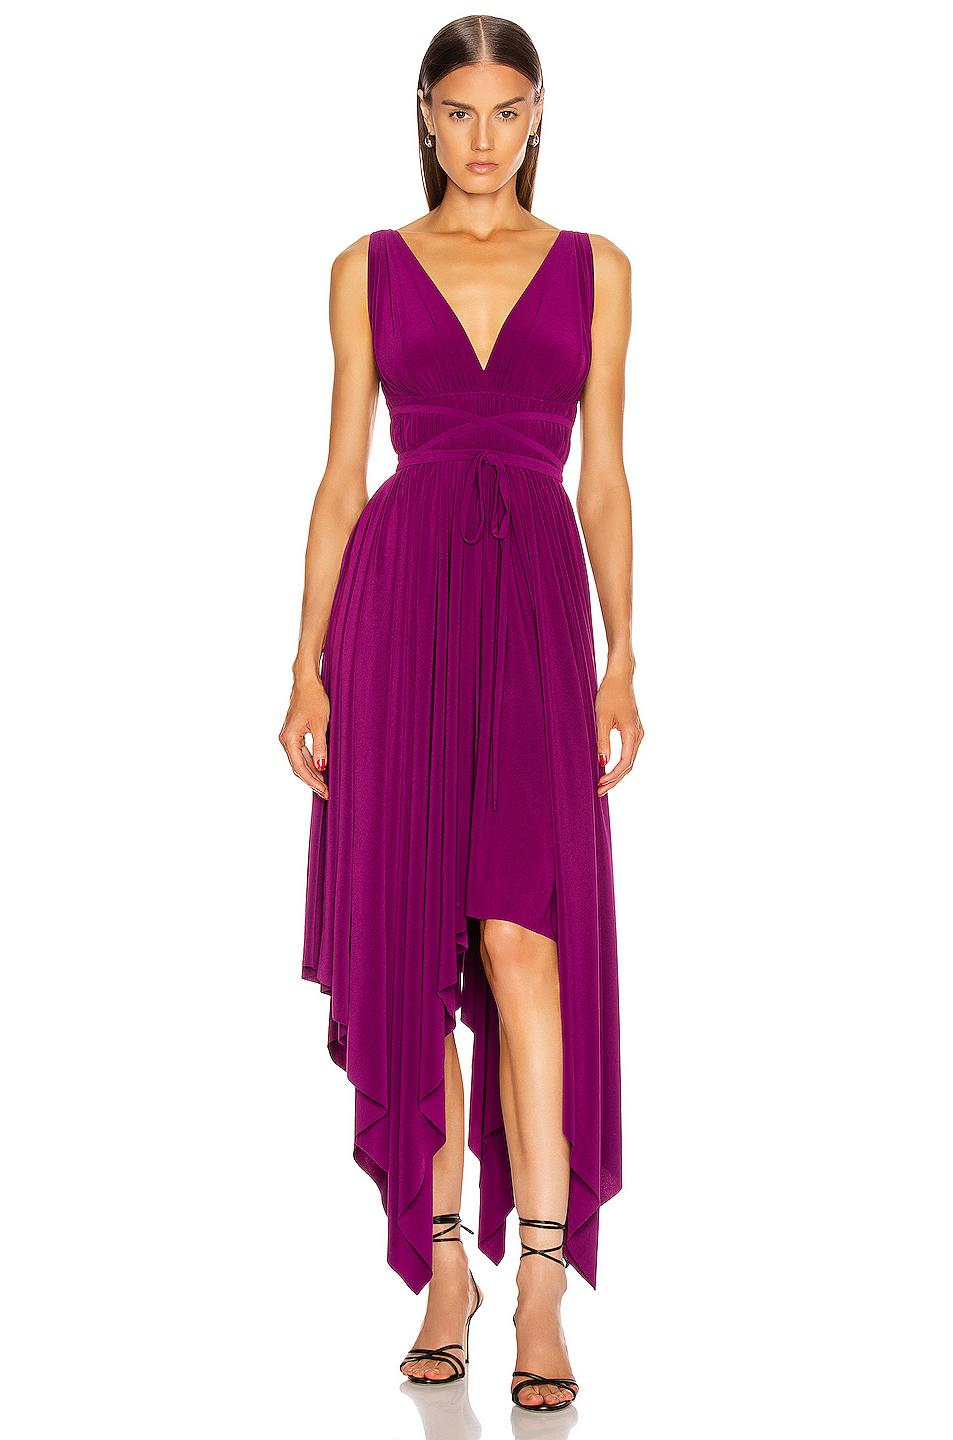 Norma Kamali Synthetic Goddess Gown in Raspberry (Purple) - Lyst